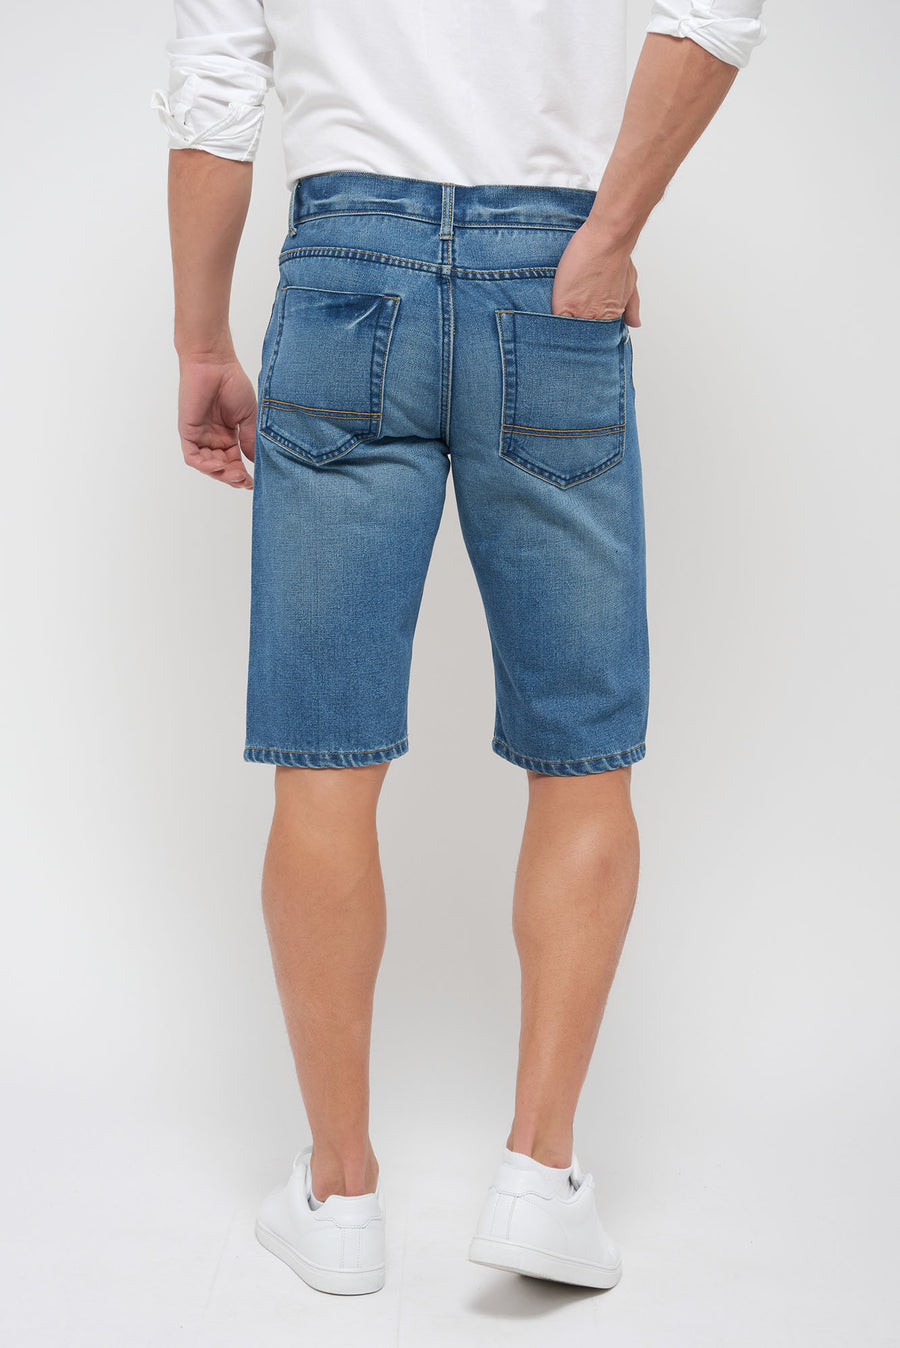 Recycled jean shorts - Straight cut - Light tone